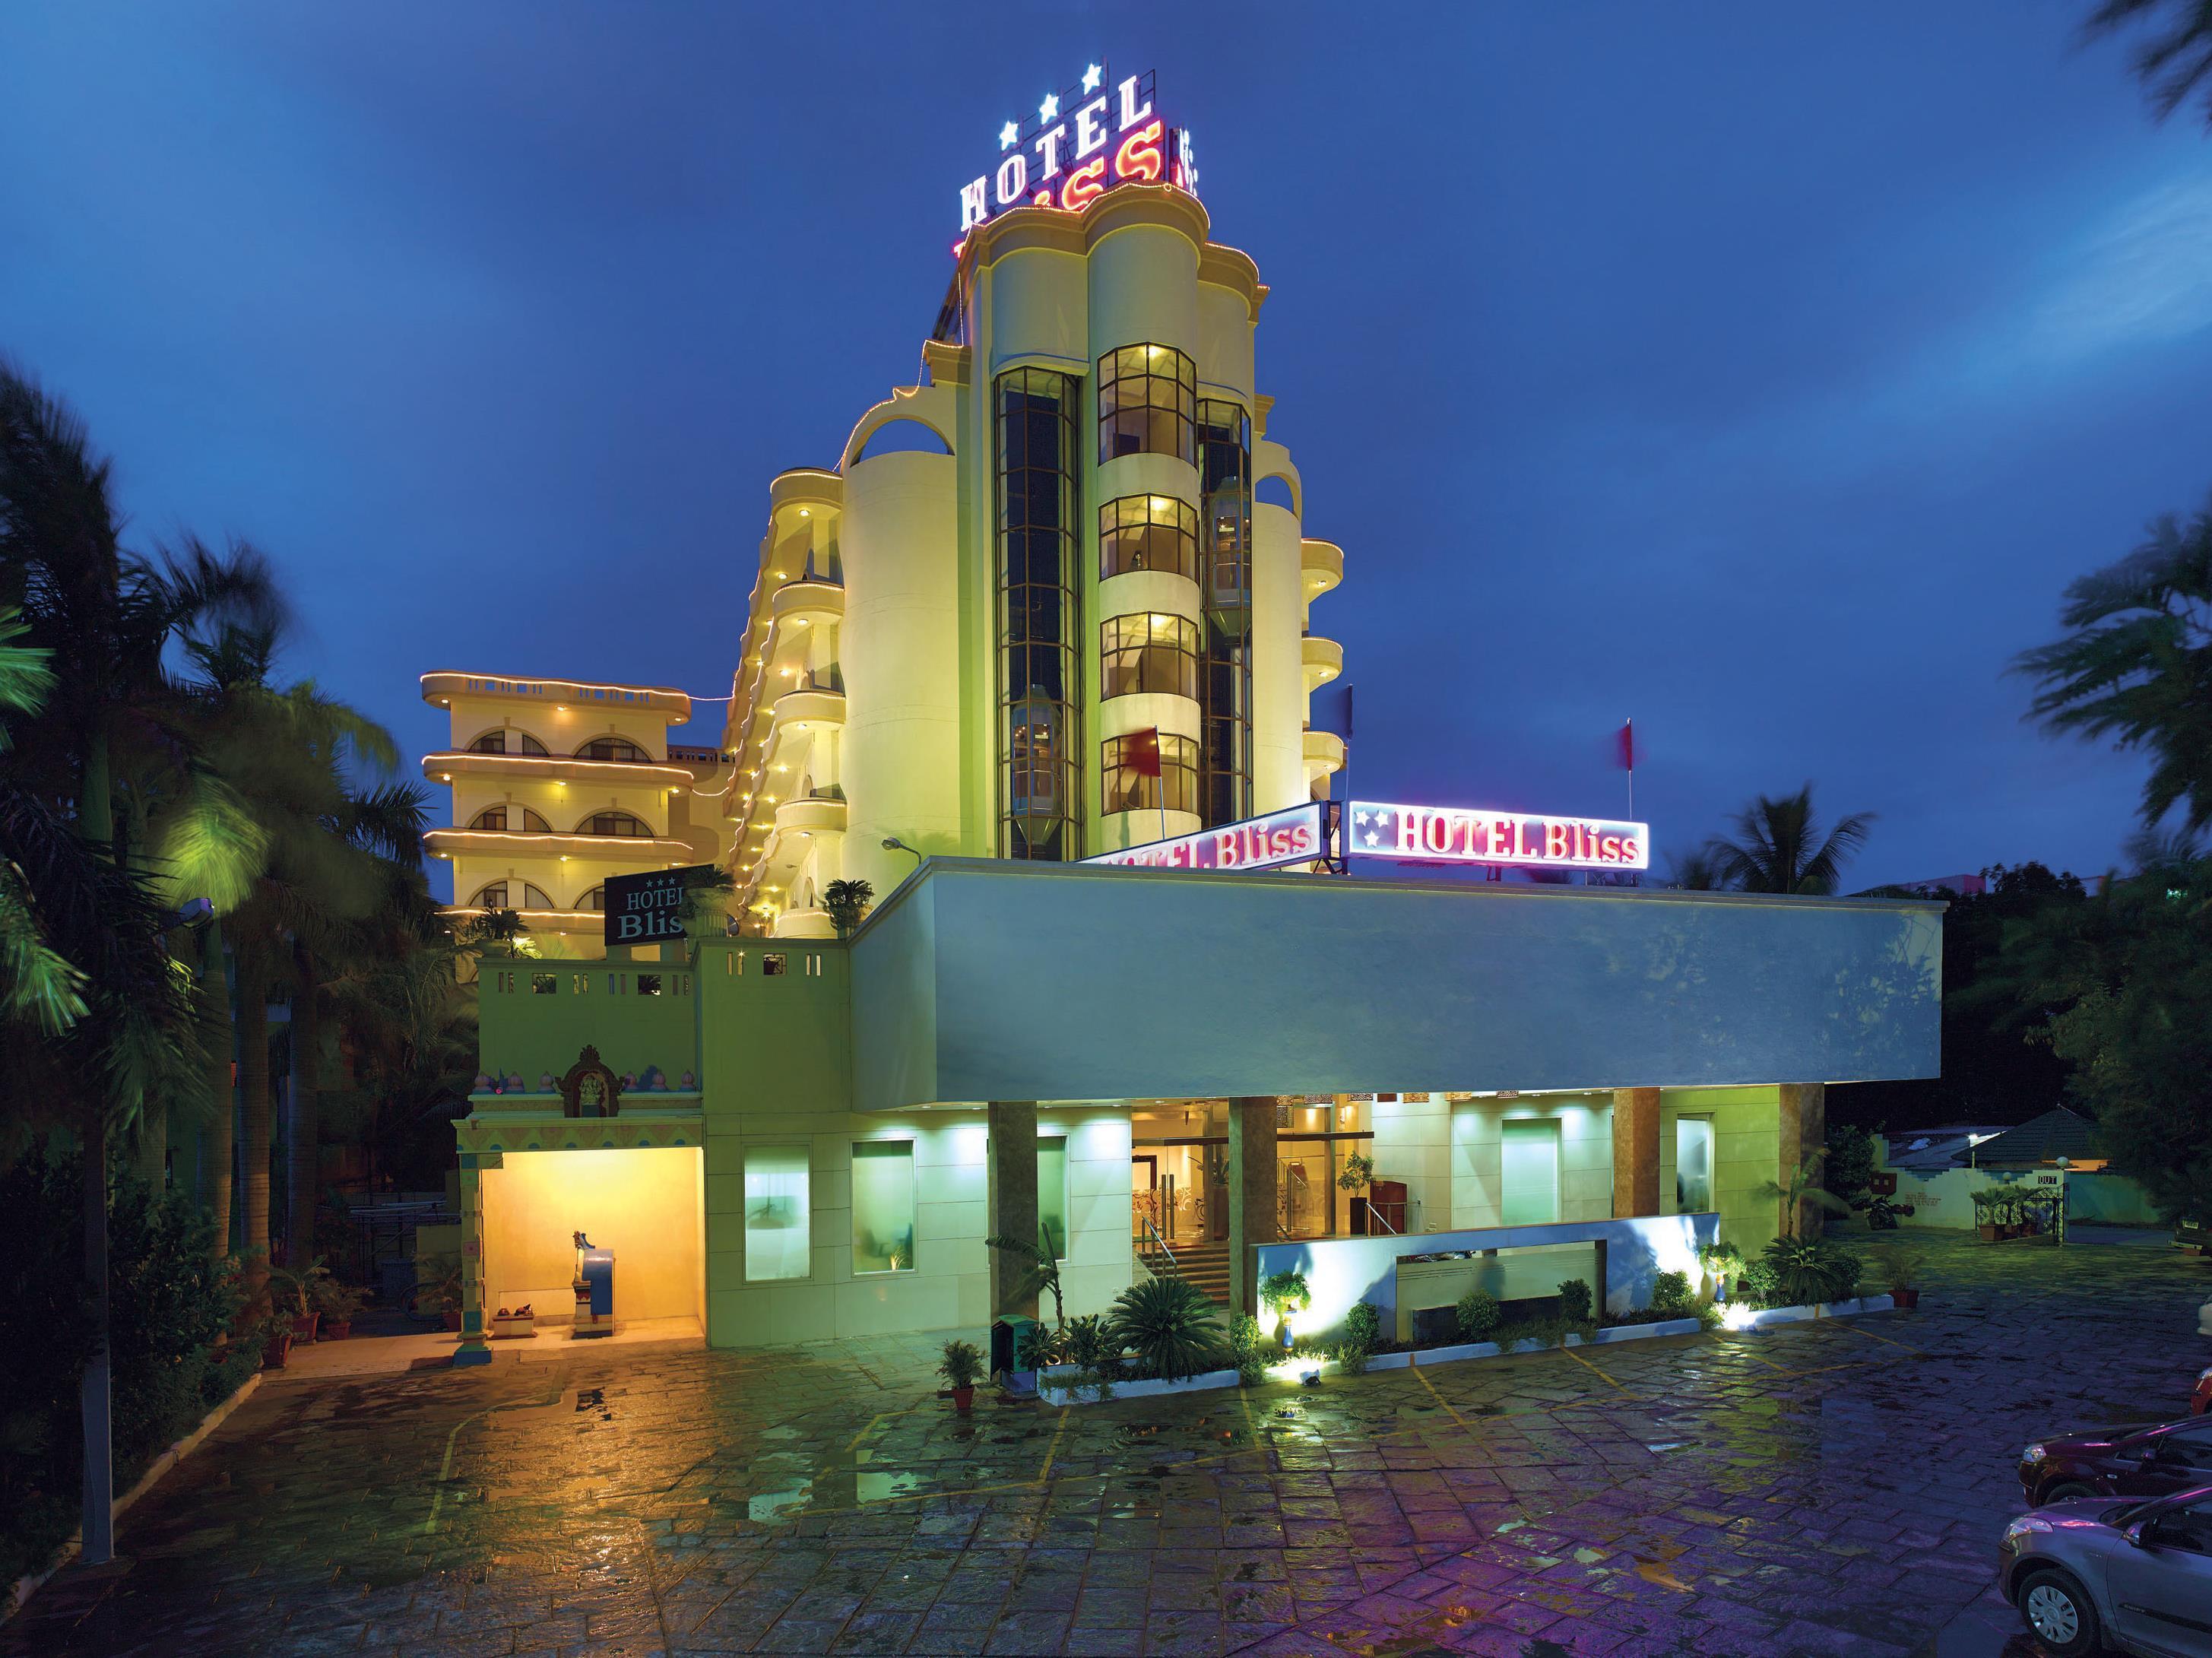 Hotel Bliss India FAQ 2017, What facilities are there in Hotel Bliss India 2017, What Languages Spoken are Supported in Hotel Bliss India 2017, Which payment cards are accepted in Hotel Bliss India , India Hotel Bliss room facilities and services Q&A 2017, India Hotel Bliss online booking services 2017, India Hotel Bliss address 2017, India Hotel Bliss telephone number 2017,India Hotel Bliss map 2017, India Hotel Bliss traffic guide 2017, how to go India Hotel Bliss, India Hotel Bliss booking online 2017, India Hotel Bliss room types 2017.